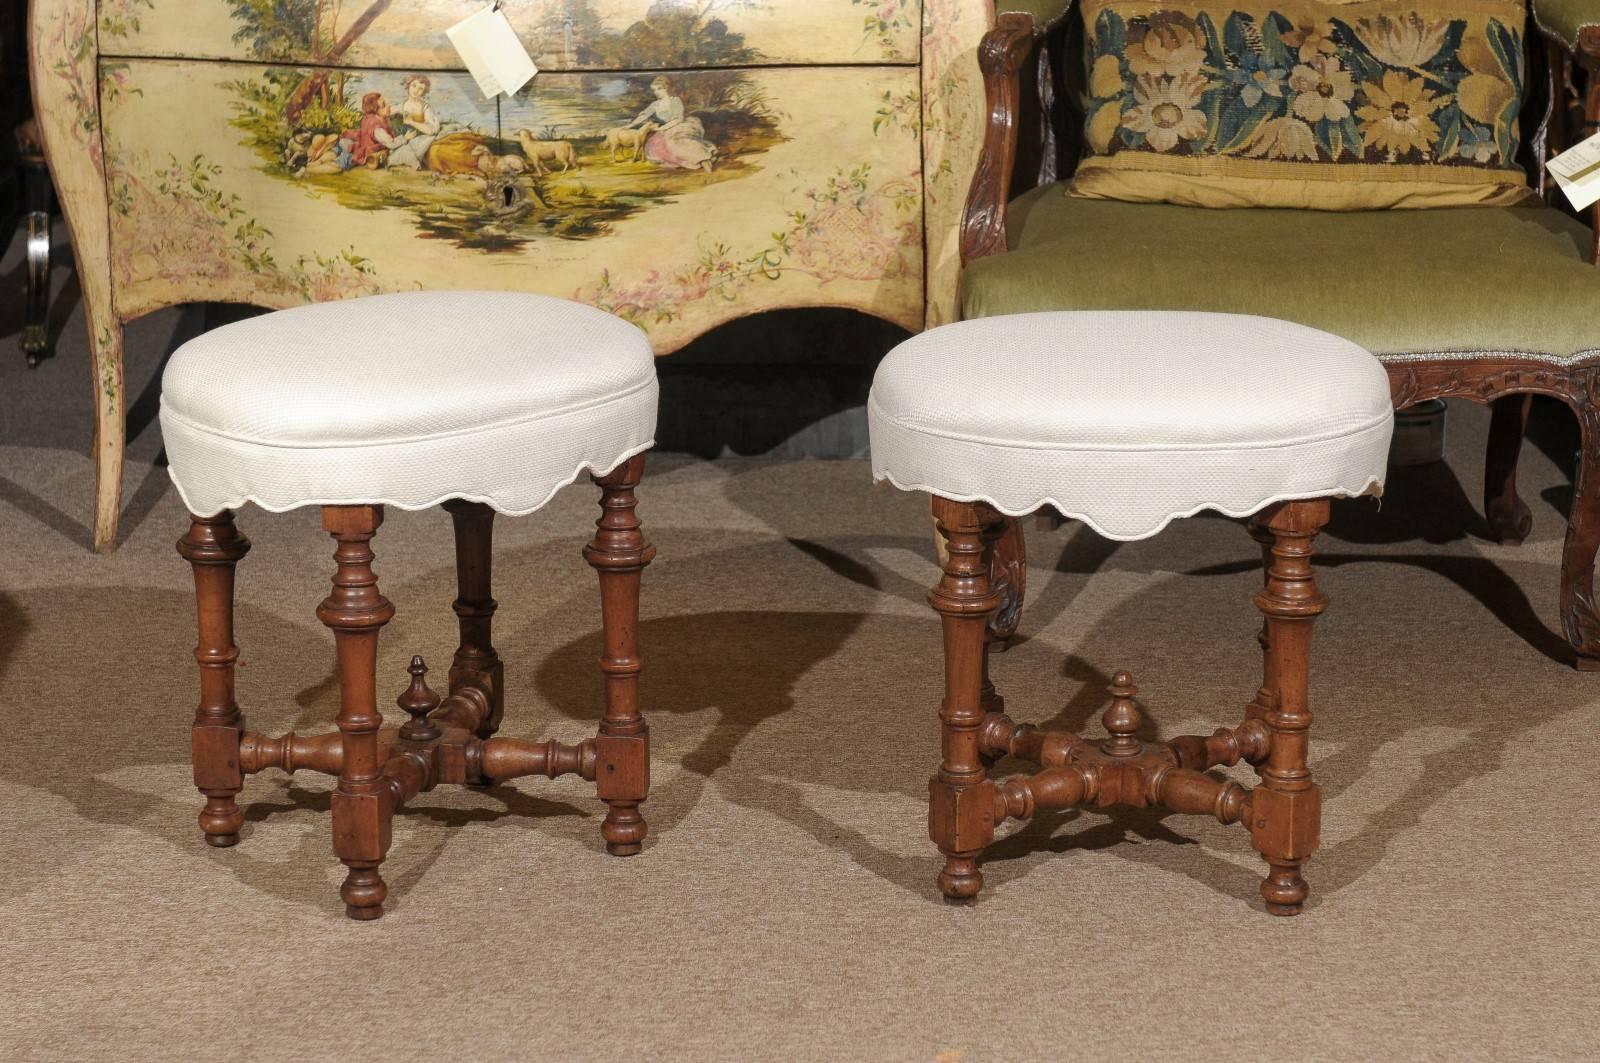 Pair of 18th century Italian turned leg oval benches in walnut.